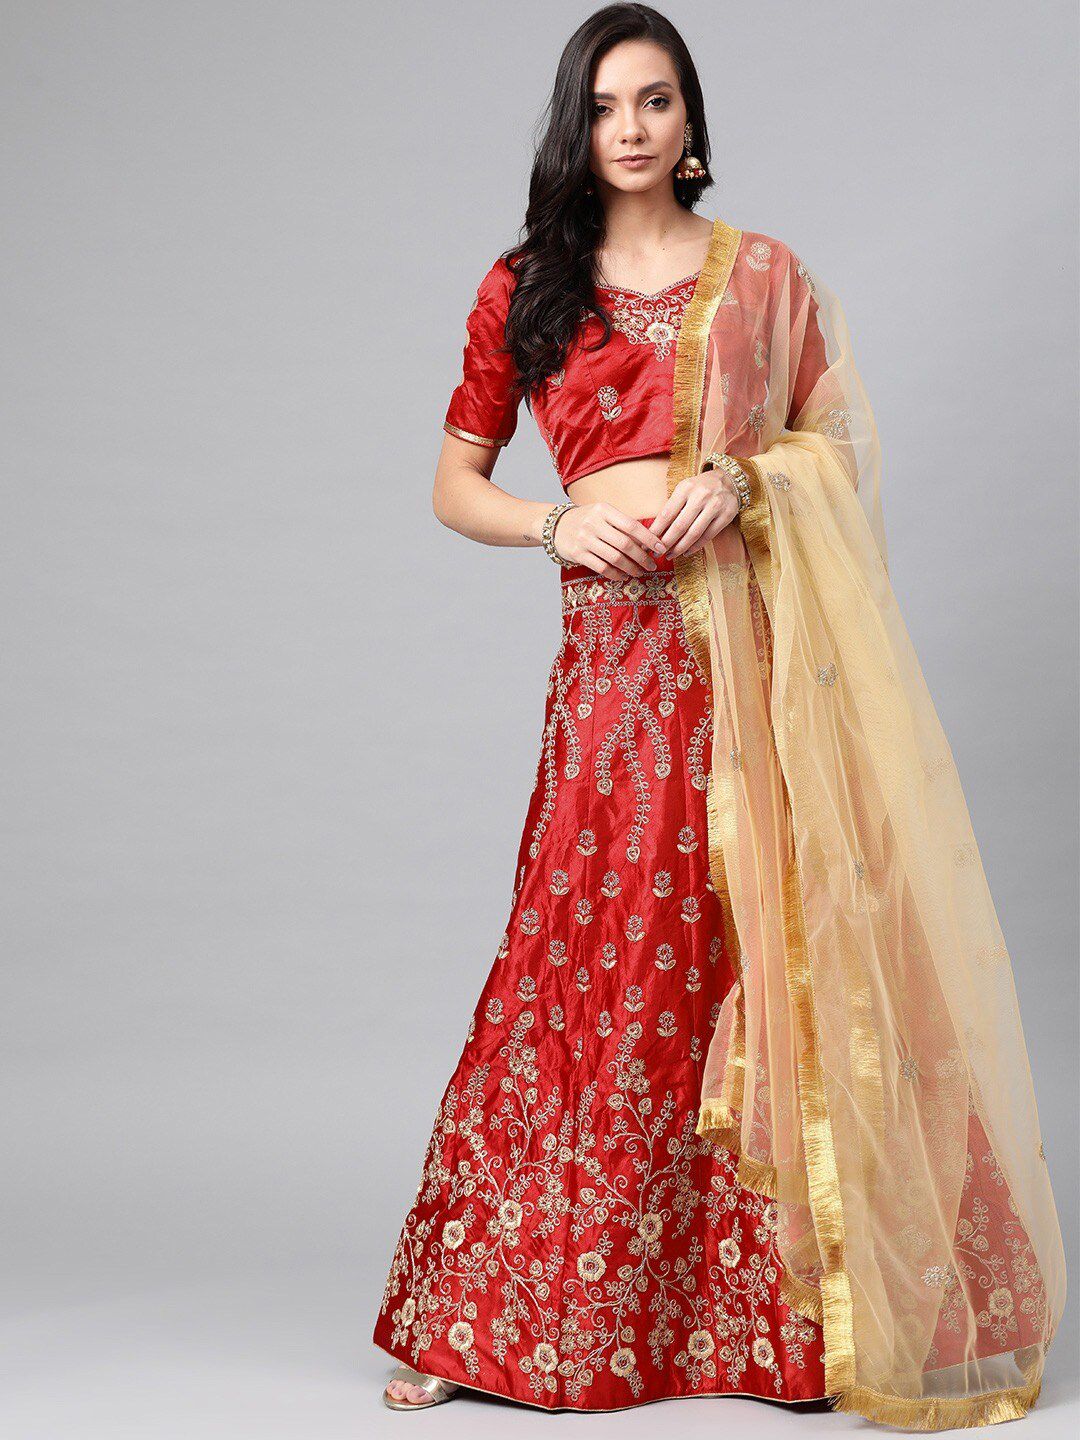 SHOPGARB Red Embroidered Semi-Stitched Lehenga & Unstitched Blouse With Dupatta Price in India